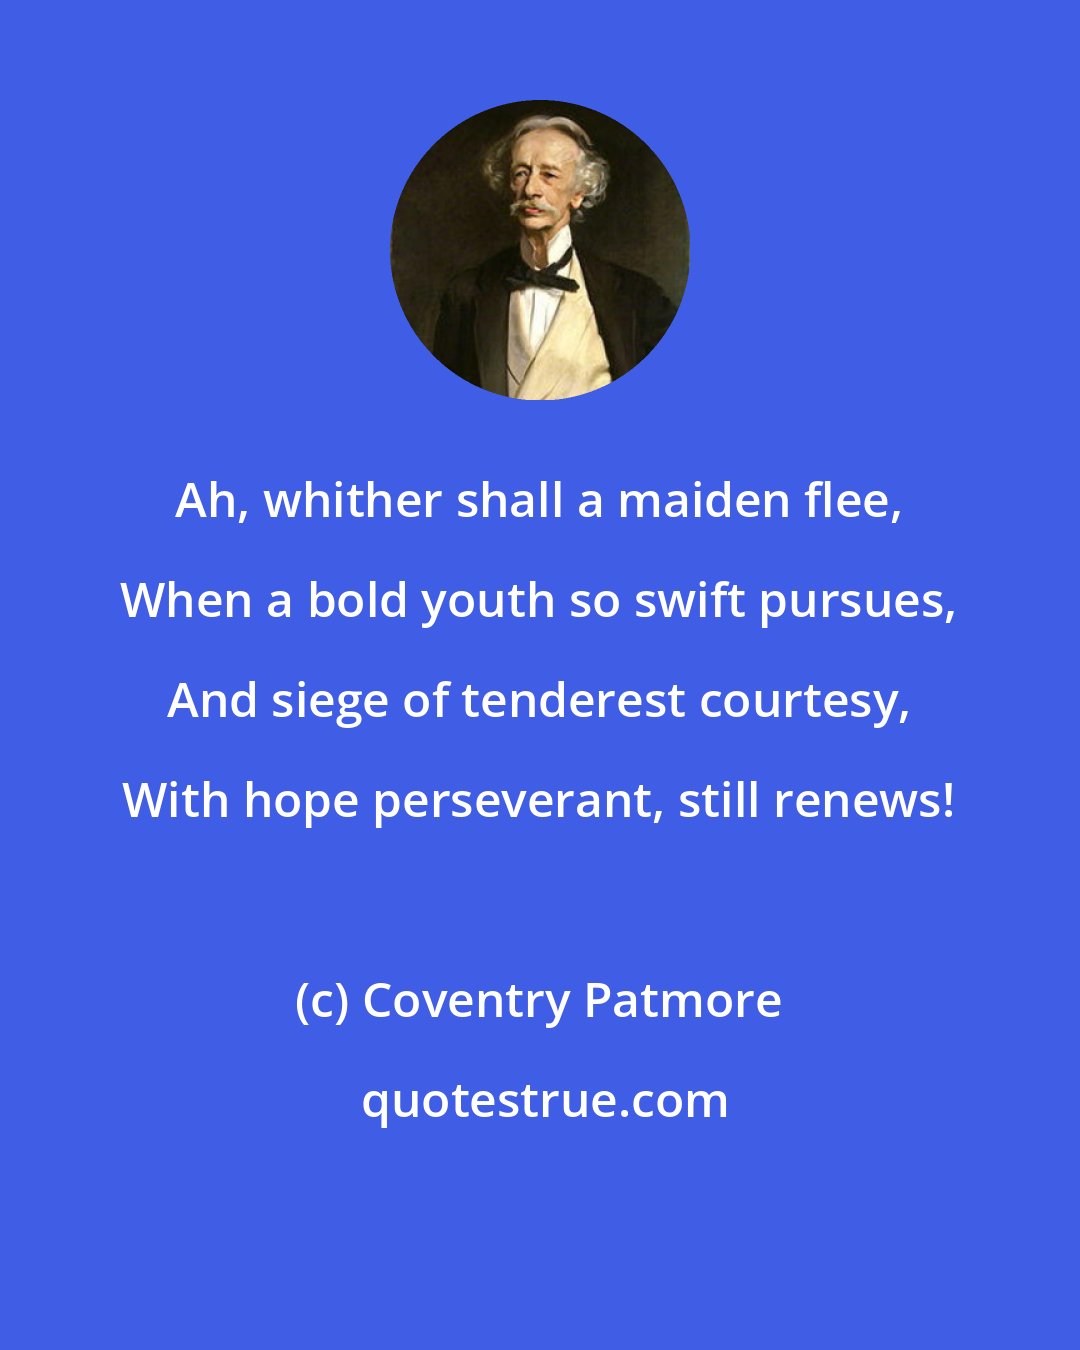 Coventry Patmore: Ah, whither shall a maiden flee, When a bold youth so swift pursues, And siege of tenderest courtesy, With hope perseverant, still renews!